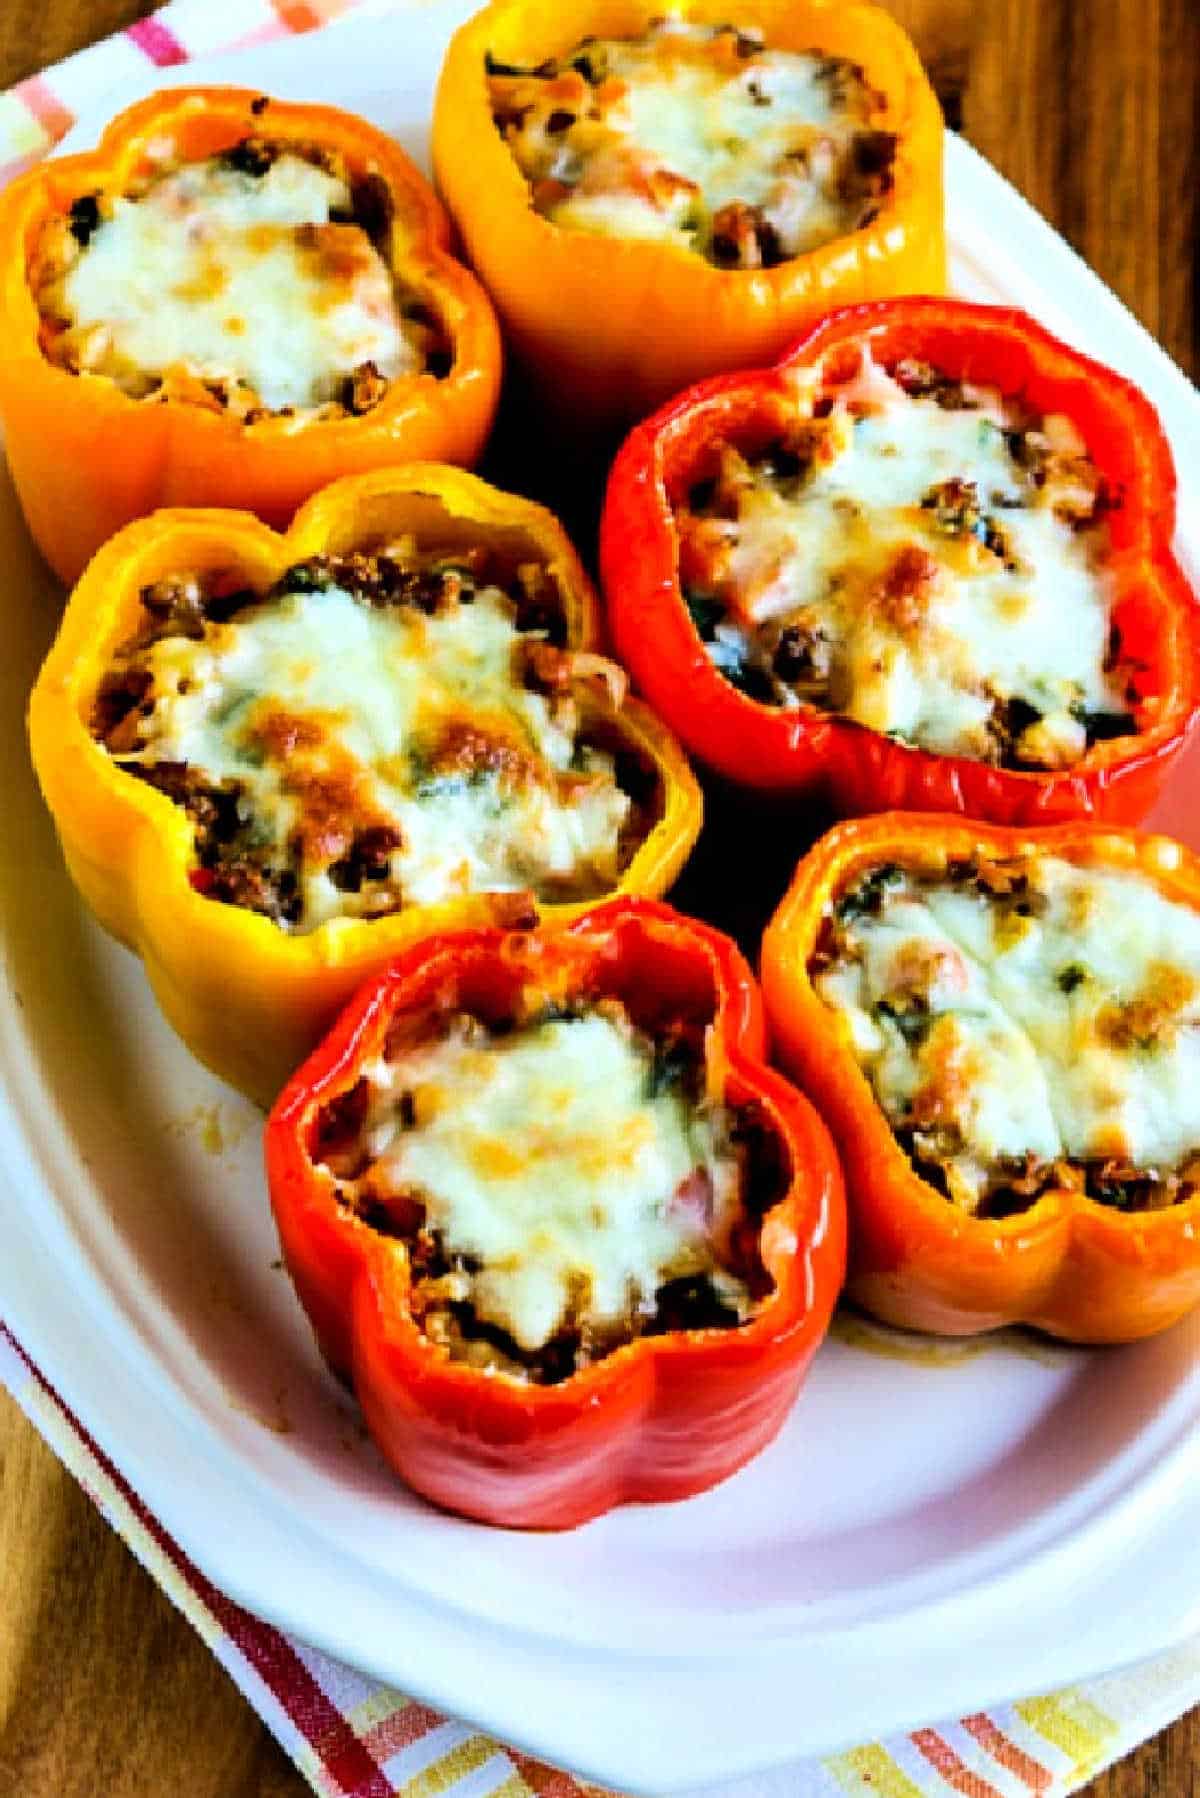 orange and yellow Cauliflower Rice Stuffed Peppers shown on serving plate